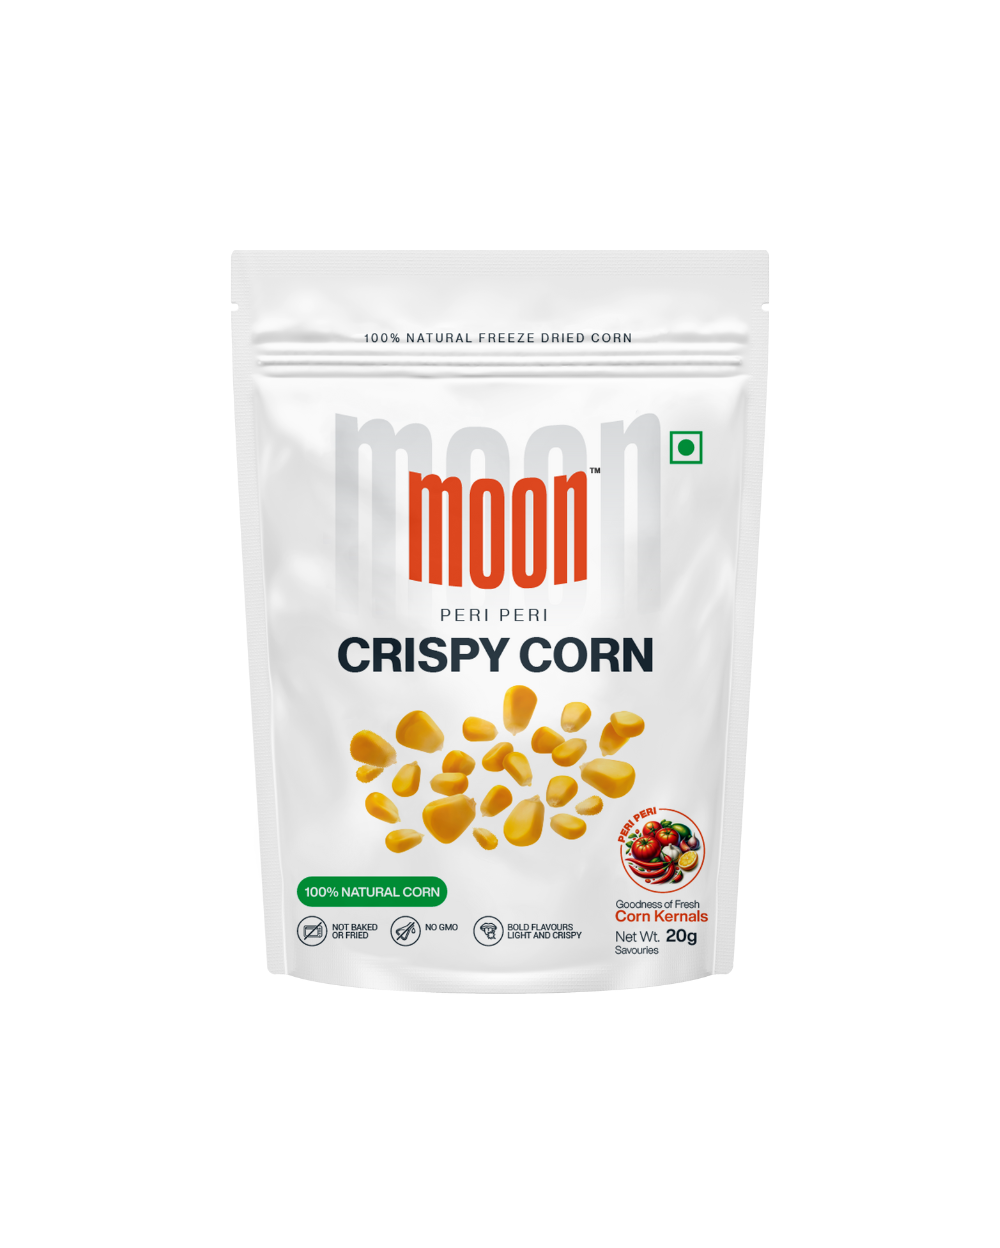 A bag of Freeze Dried Crispy Corn Peri Peri, known for its crunchy texture and low calorie content, presented on a white background.